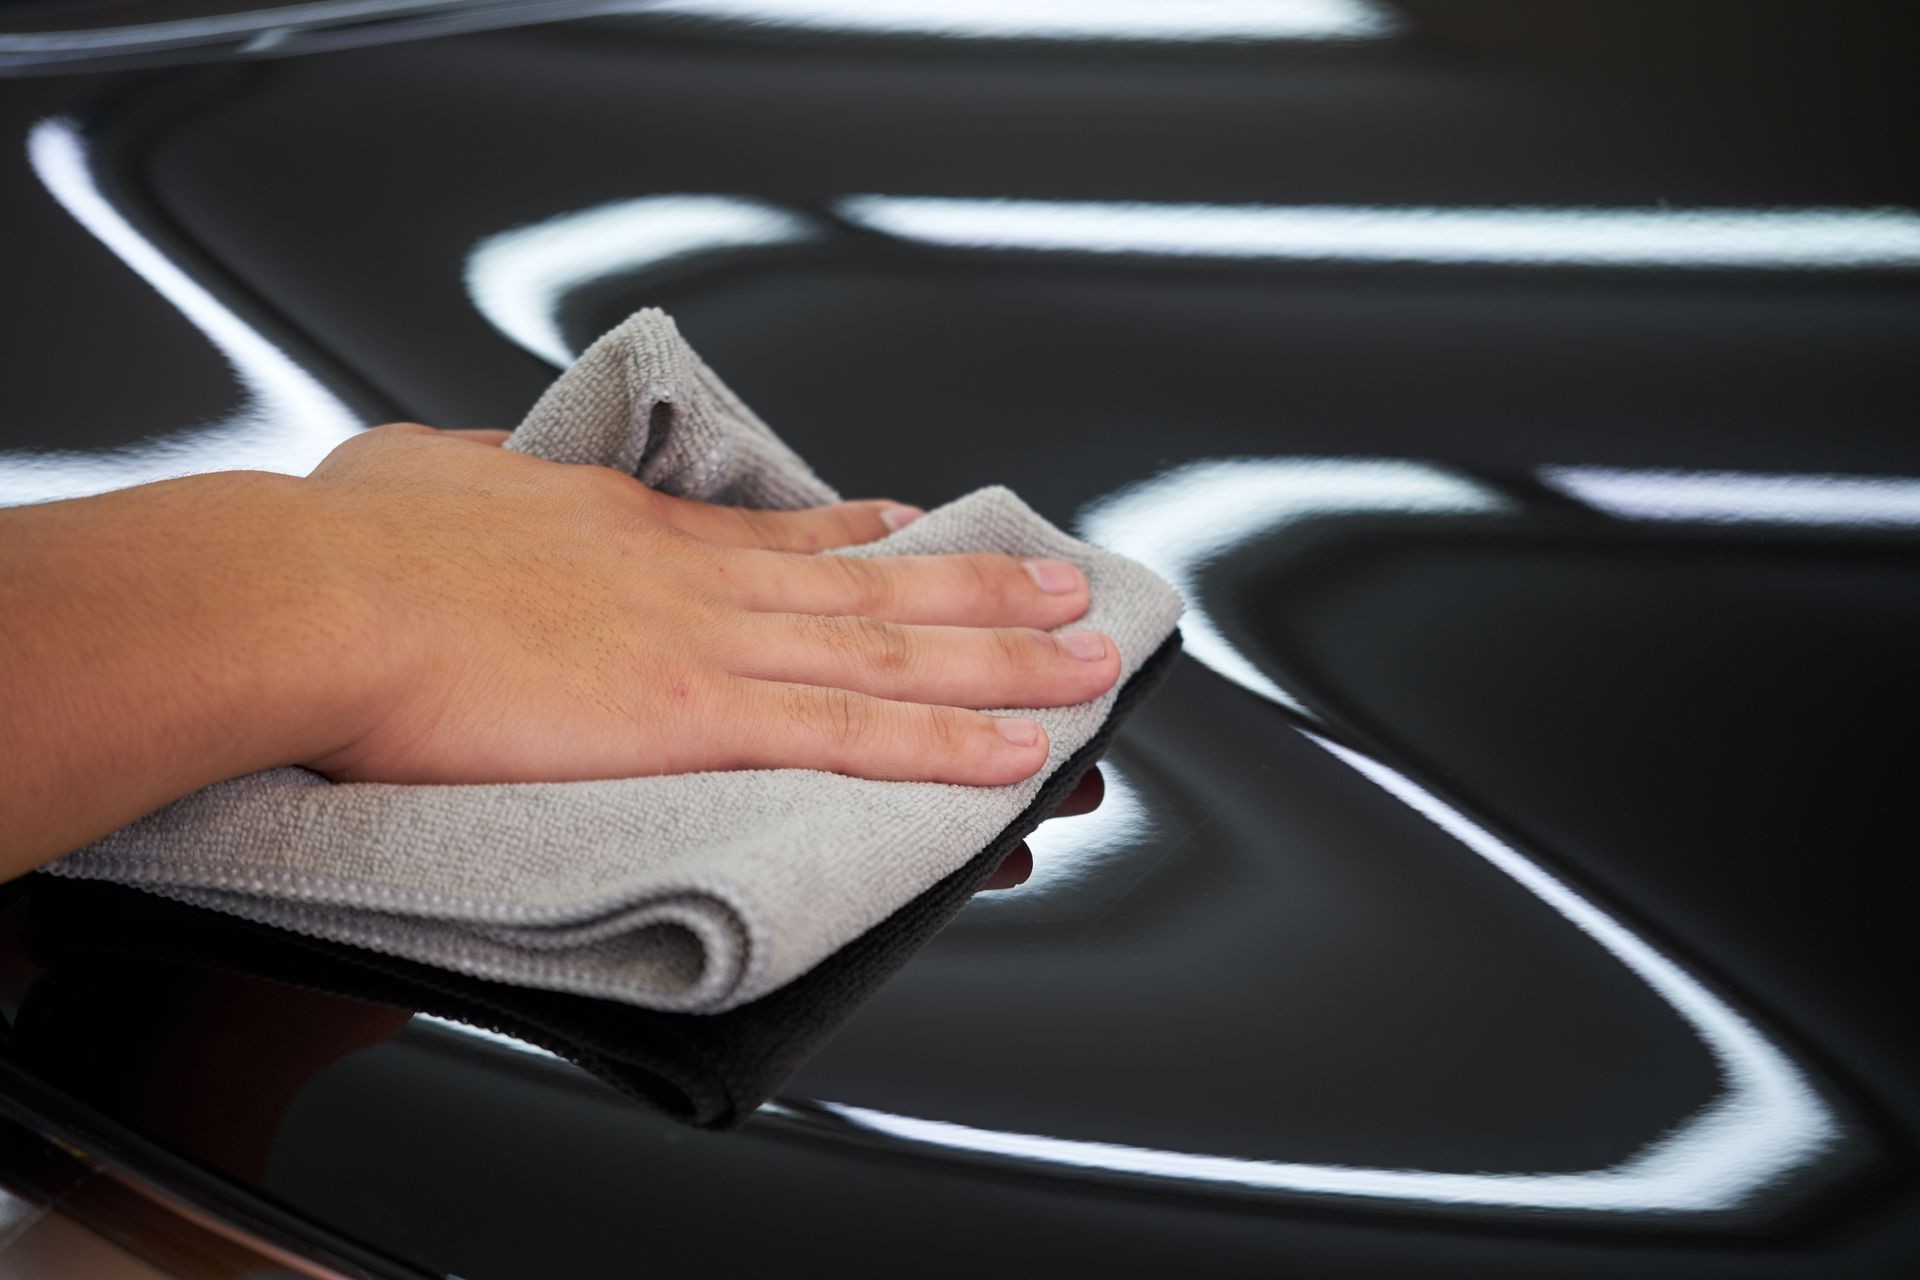 Man's hand cleaning car and drying vehicle with microfiber cloth. Hand wipe down paint surface of shiny black sedan after polishing and ceramic coating. Car detailing  and car wash concept.